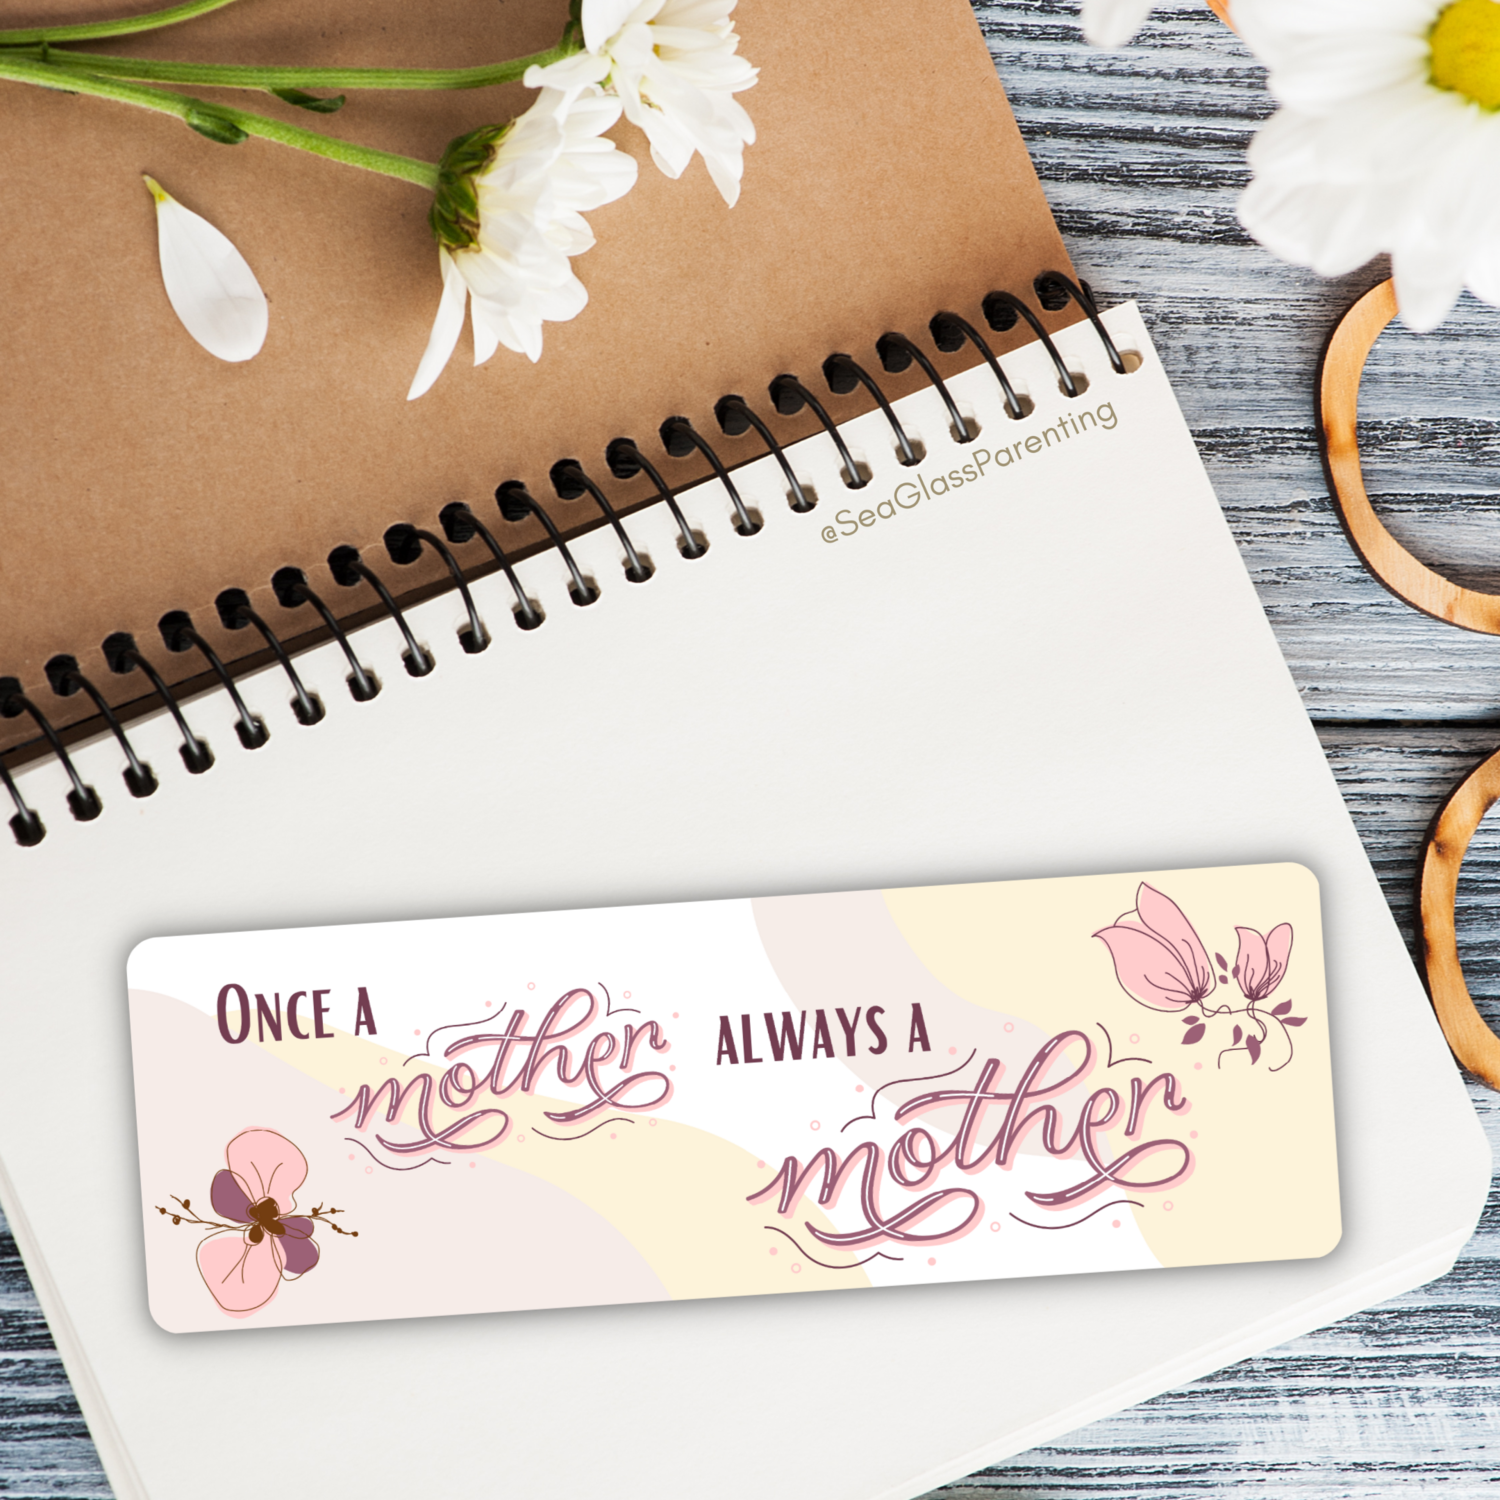 Once a Mother, Always a Mother with Pink flowers—Baby Loss Awareness & Remembrance (bookmark)